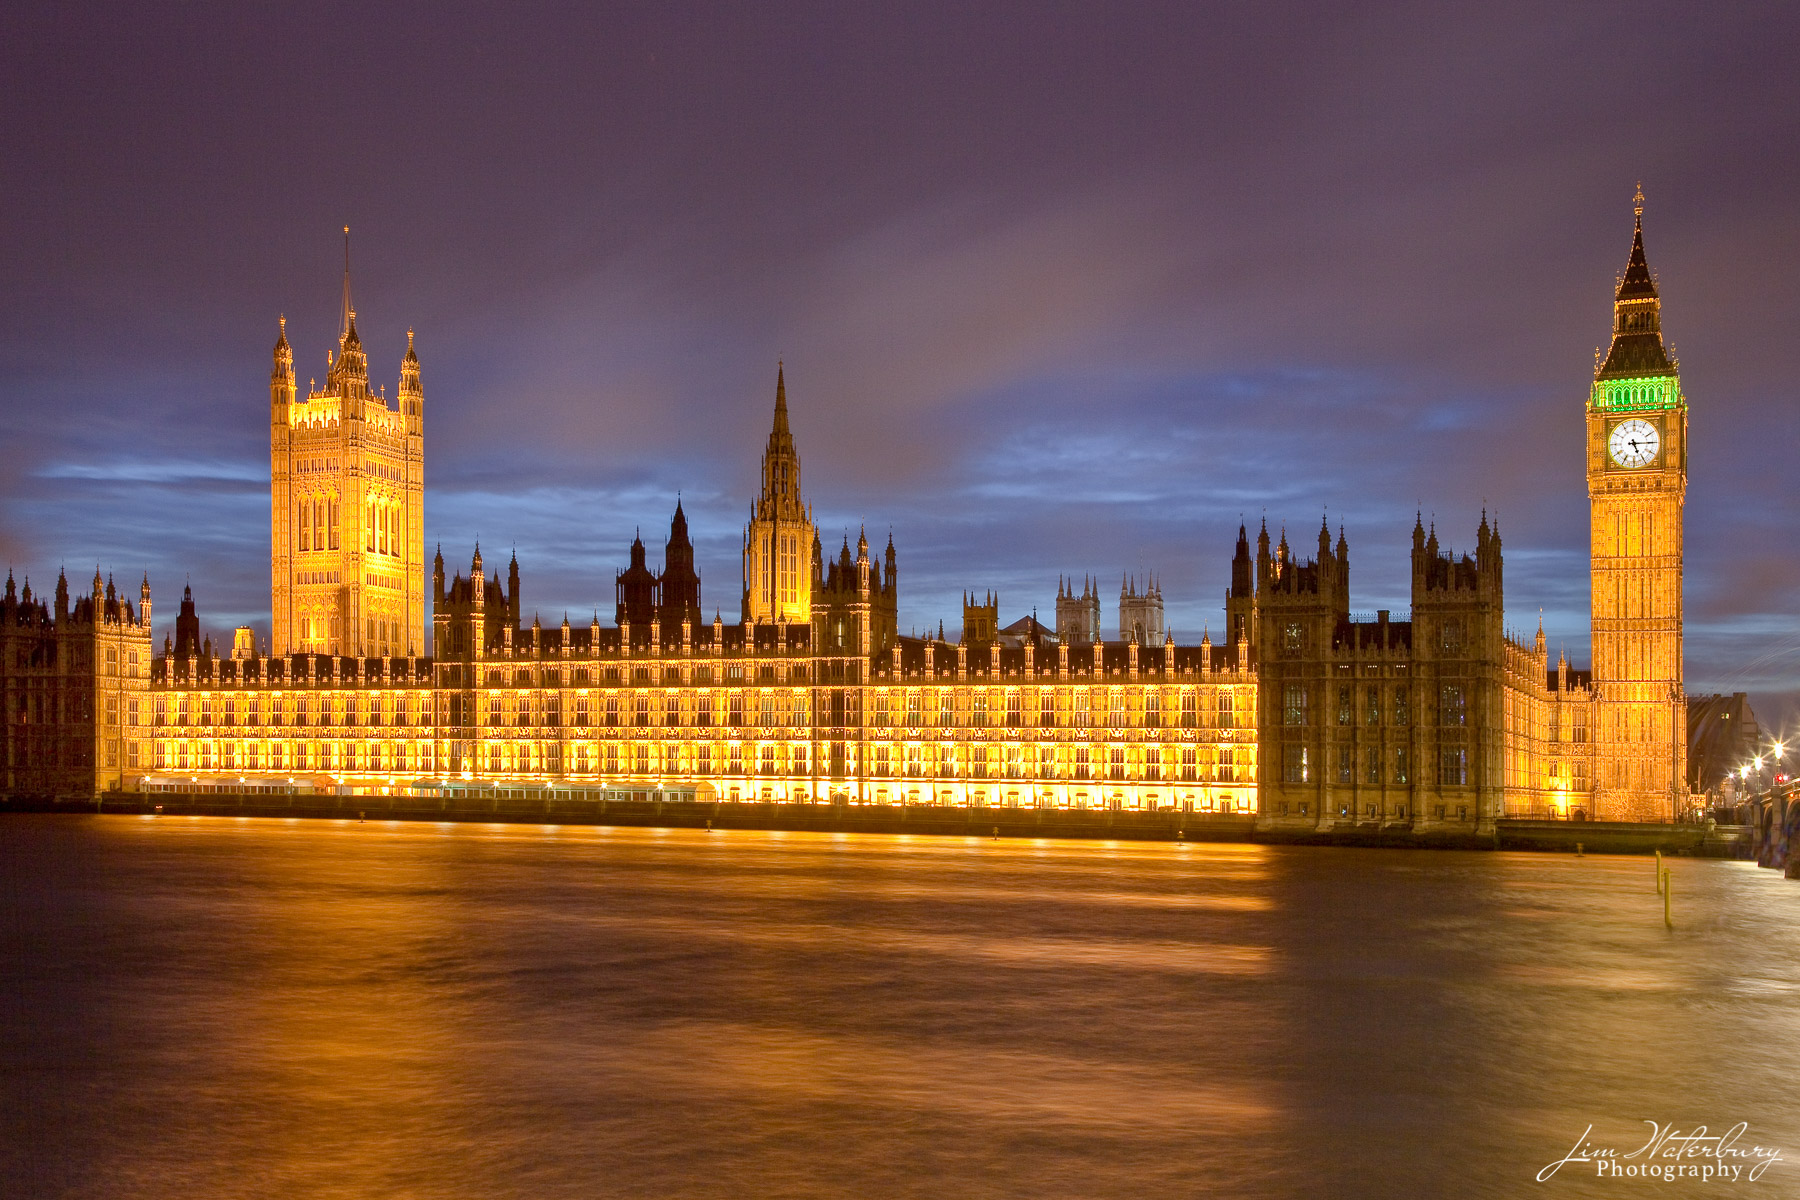 The Palace of Westminster, also known as the Houses of Parliament, sits on the north bank of the River Thames, and is illuminated...